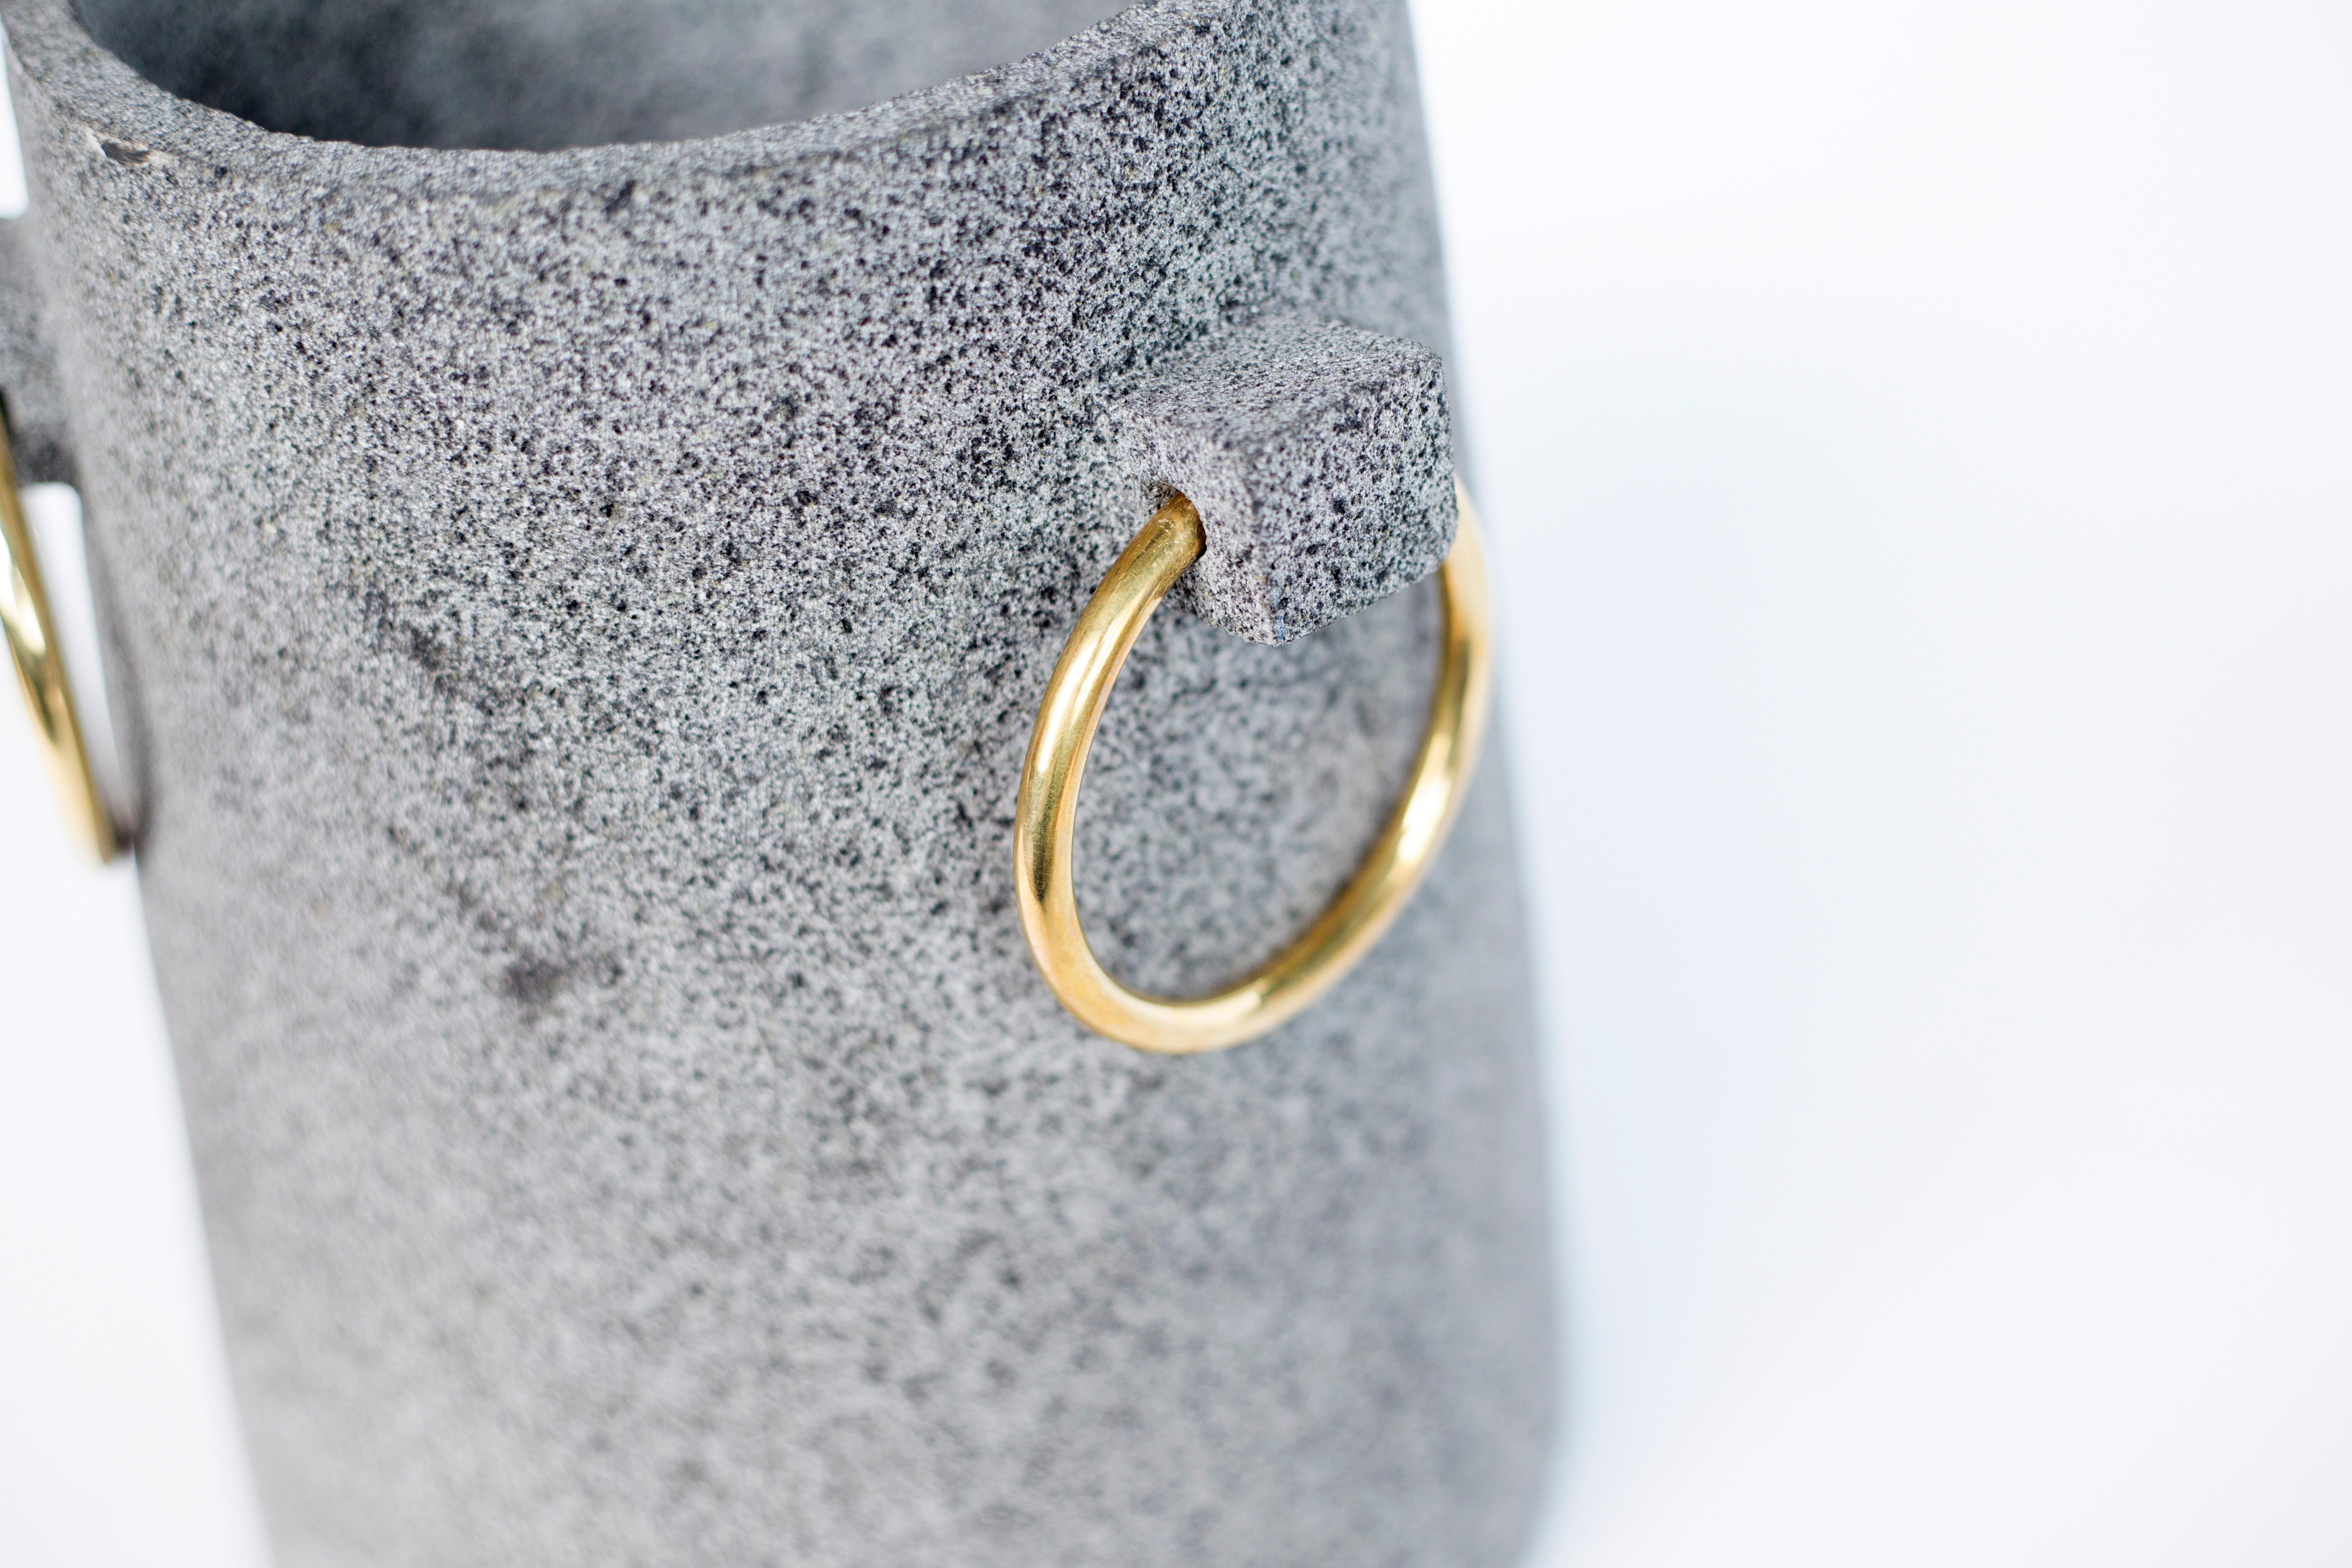 Each Mixteca vase is one of a kind hand-carved in volcanic stone. In the hands of the best craftsmen’s becomes a contemporary piece inspired by the Pre-Hispanic culture in México. The material of rings is brass, which generates an unexpected